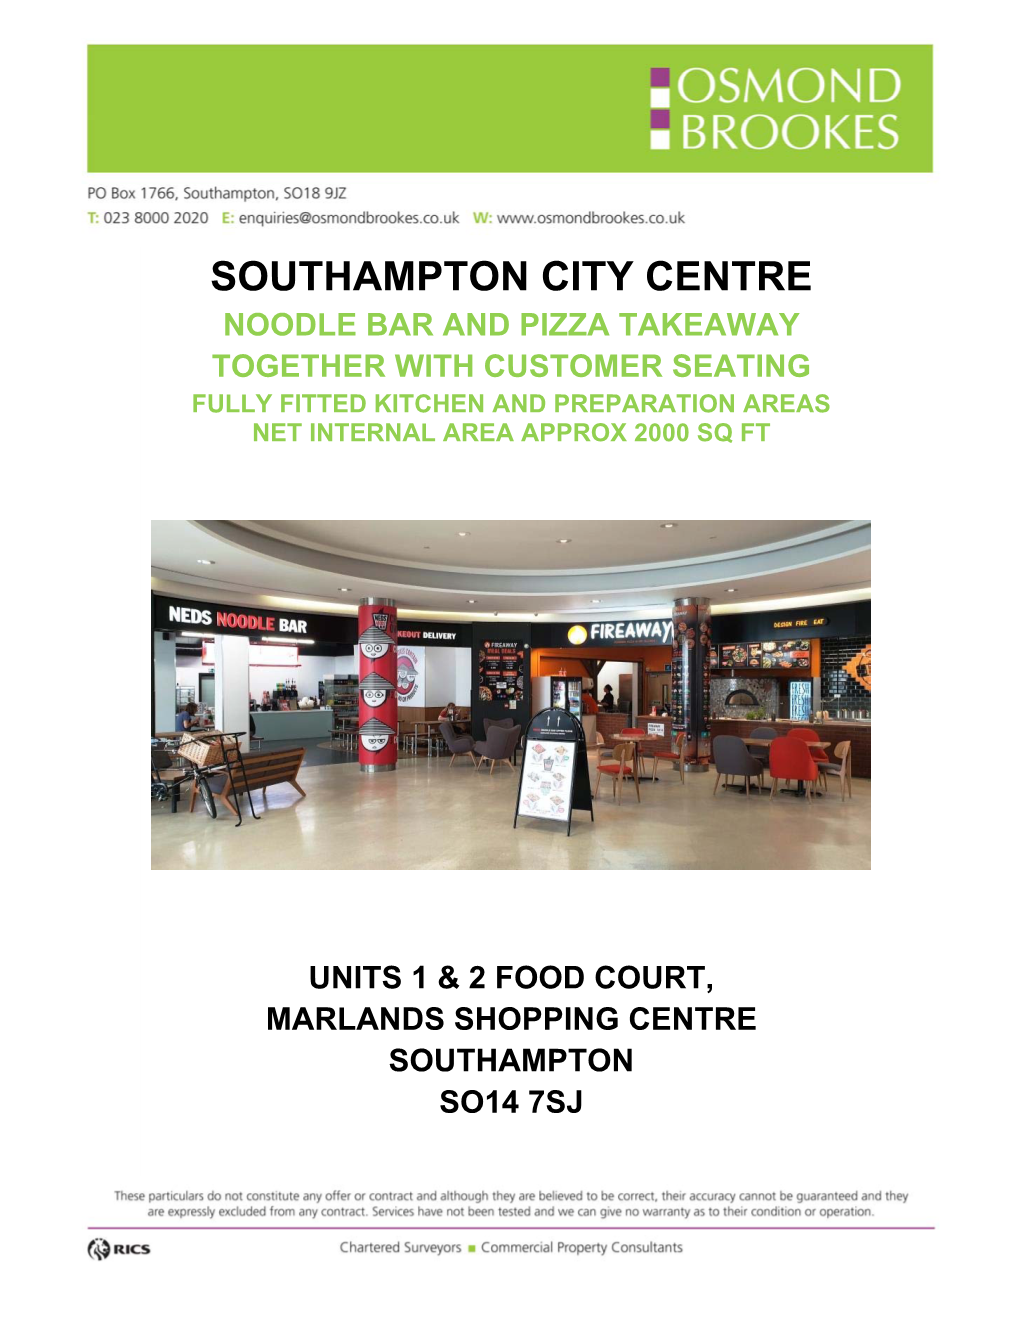 Southampton City Centre Noodle Bar and Pizza Takeaway Together with Customer Seating Fully Fitted Kitchen and Preparation Areas Net Internal Area Approx 2000 Sq Ft